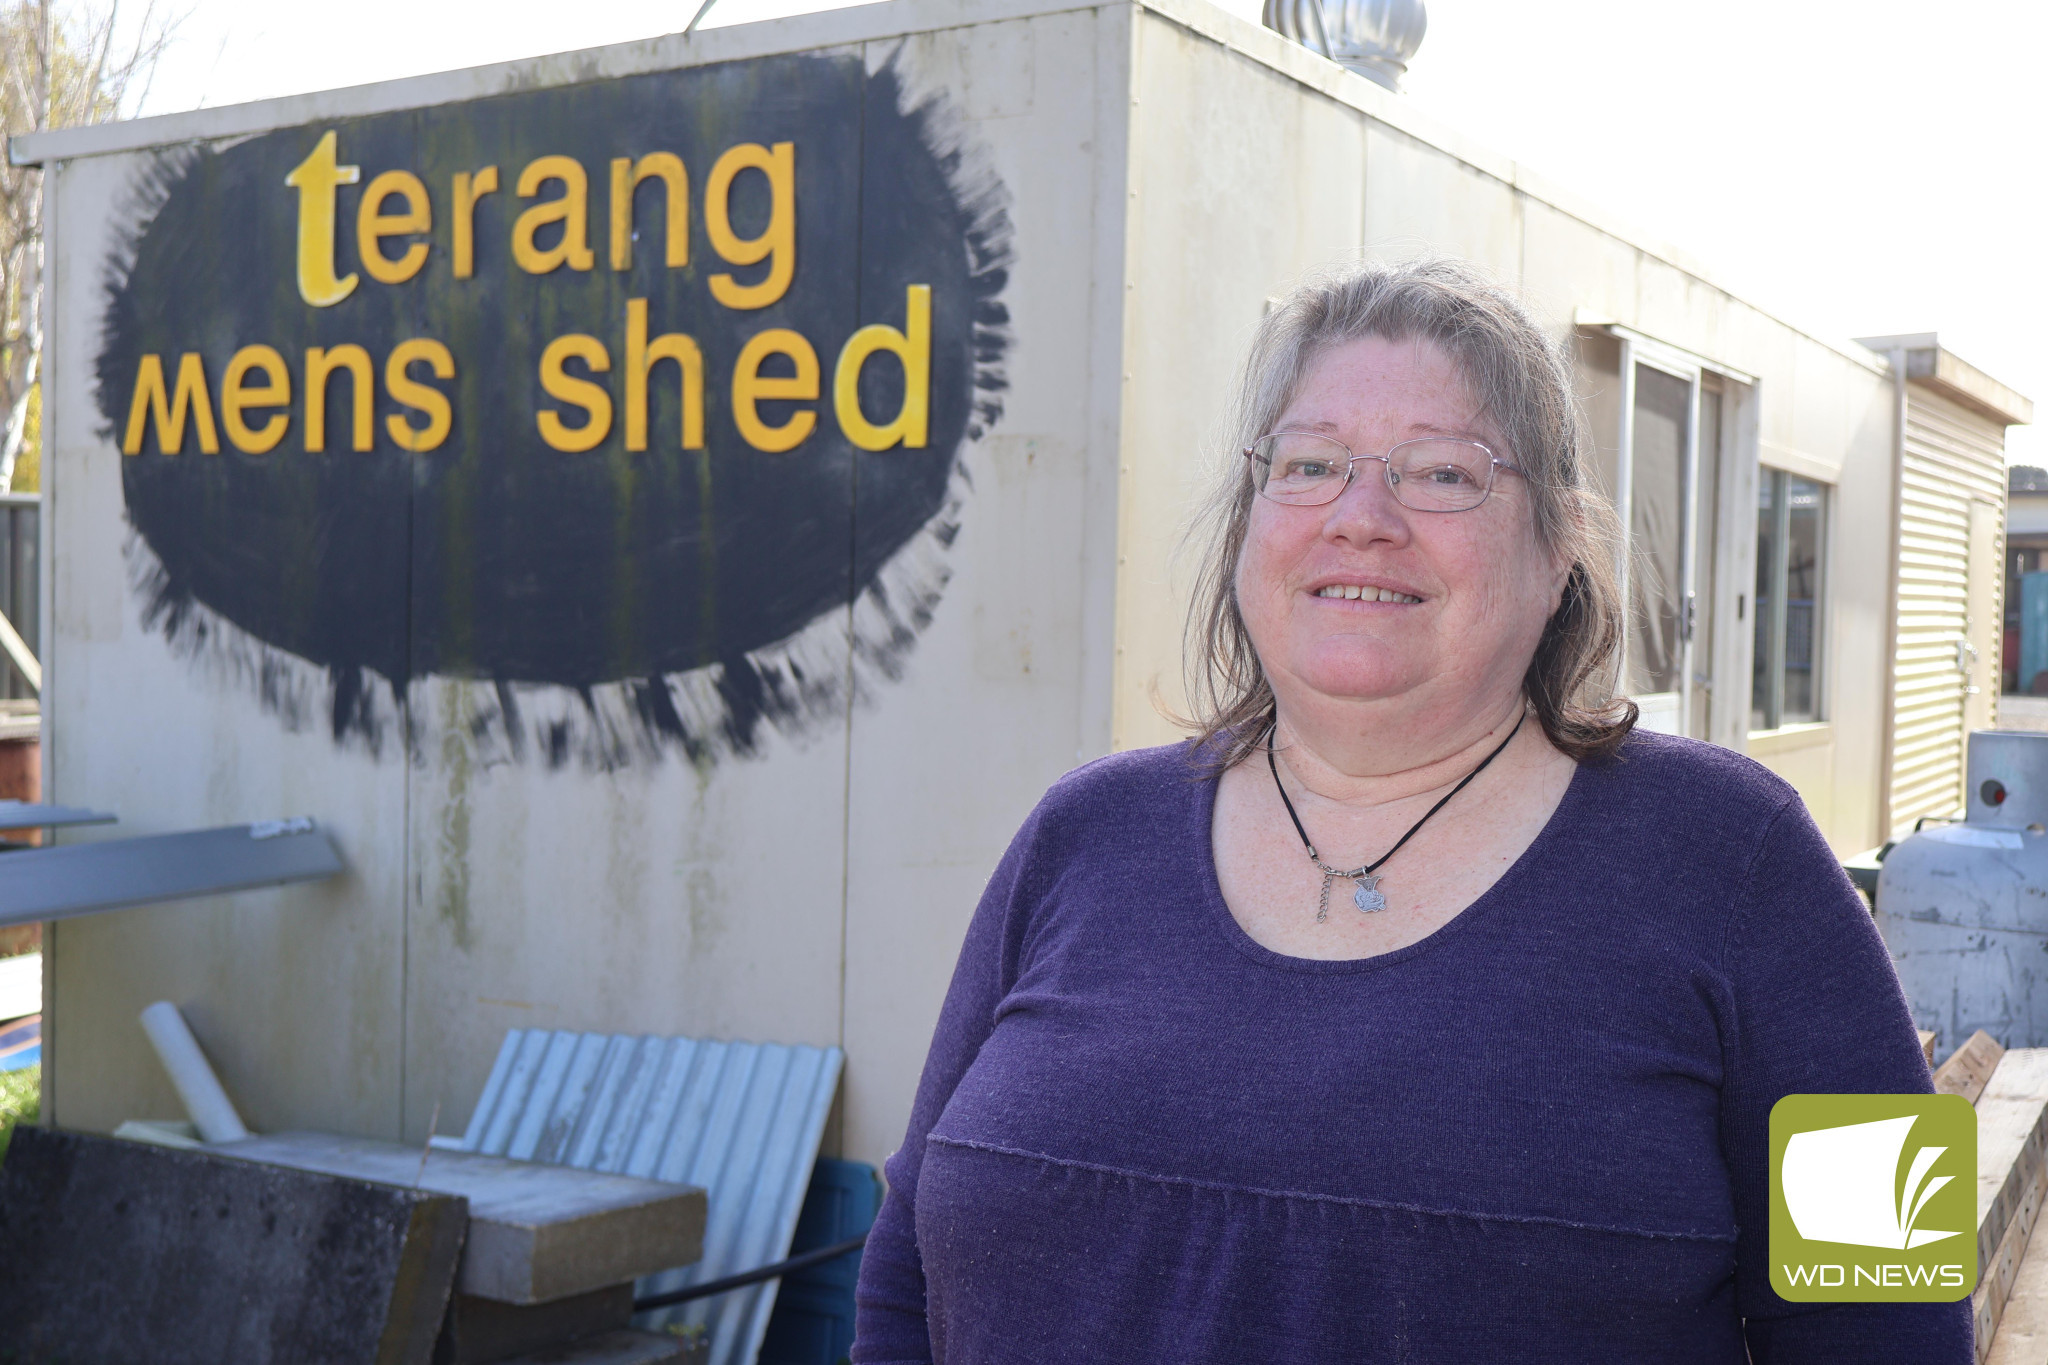 All welcome: Terang Men’s Shed president Mandy Clarke has welcomed the return of Ladies Day for the local women interested in learning or improving their skills, and to build stronger social connections.